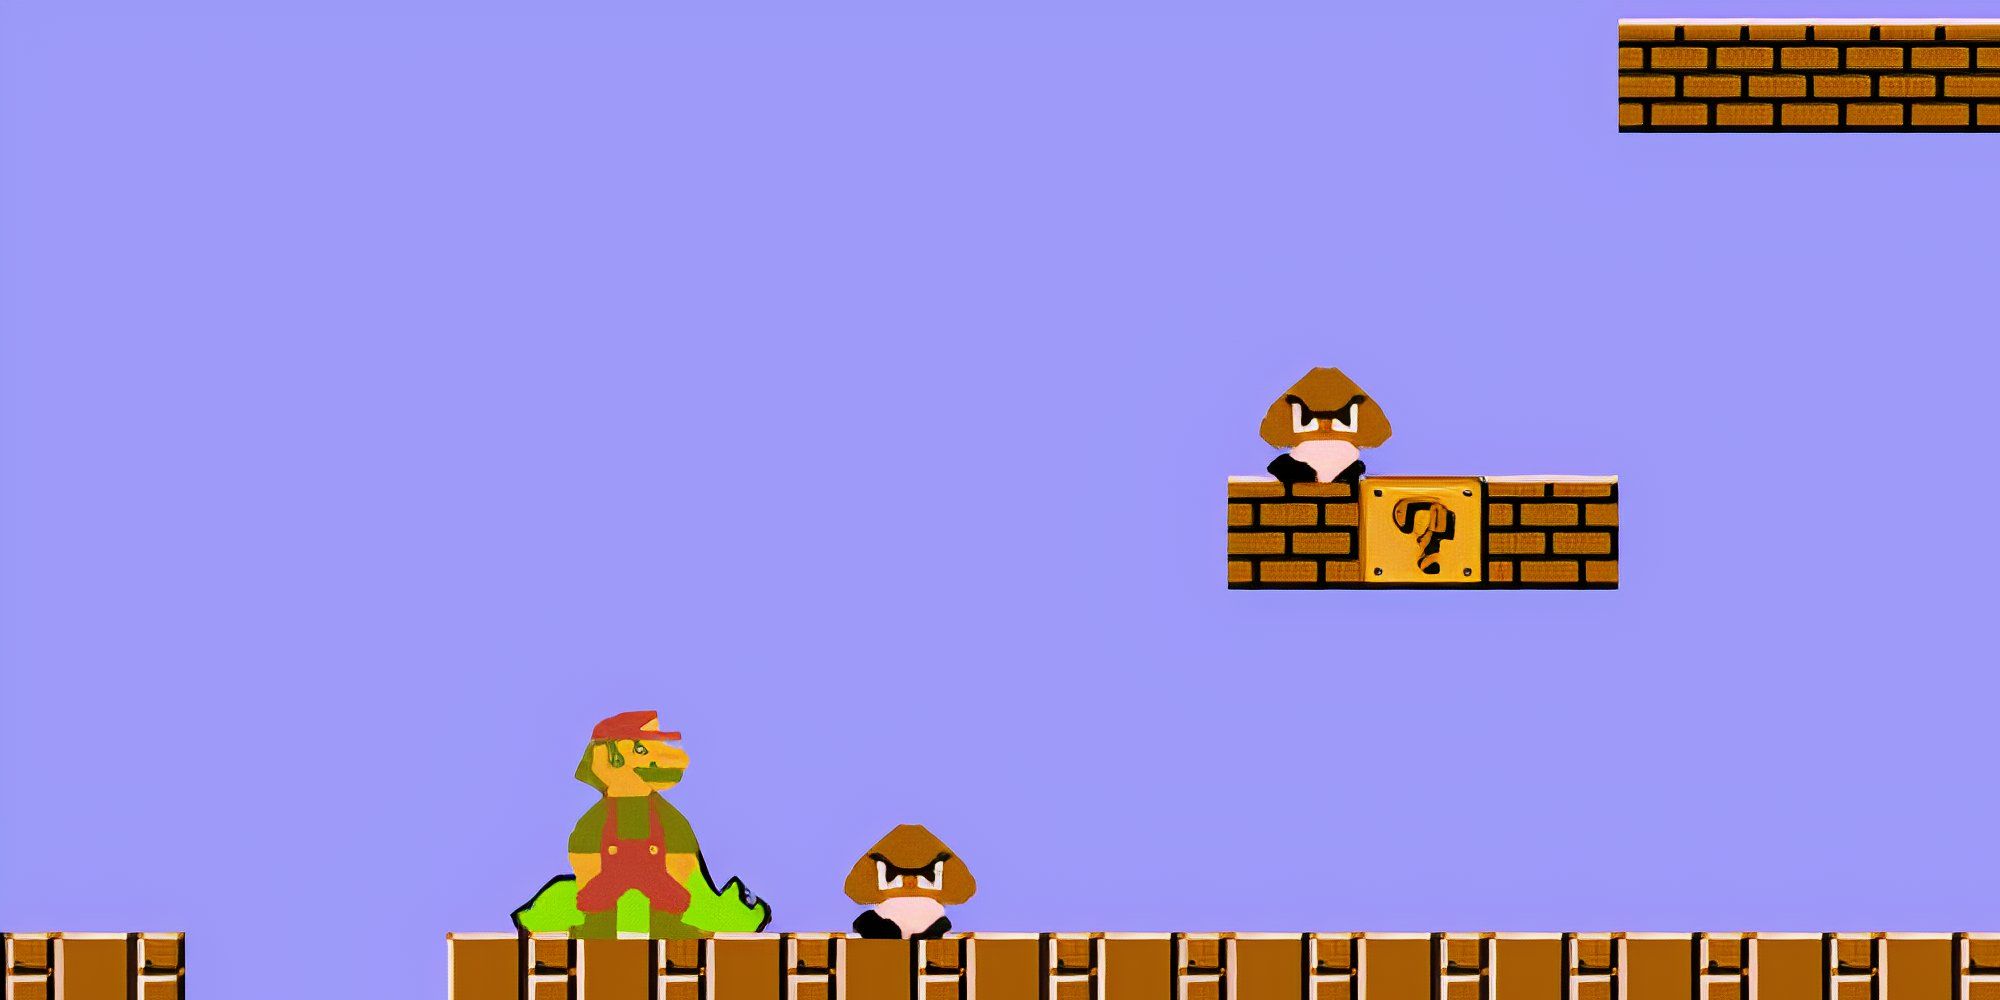 Playing a level in Super Mario Bros.